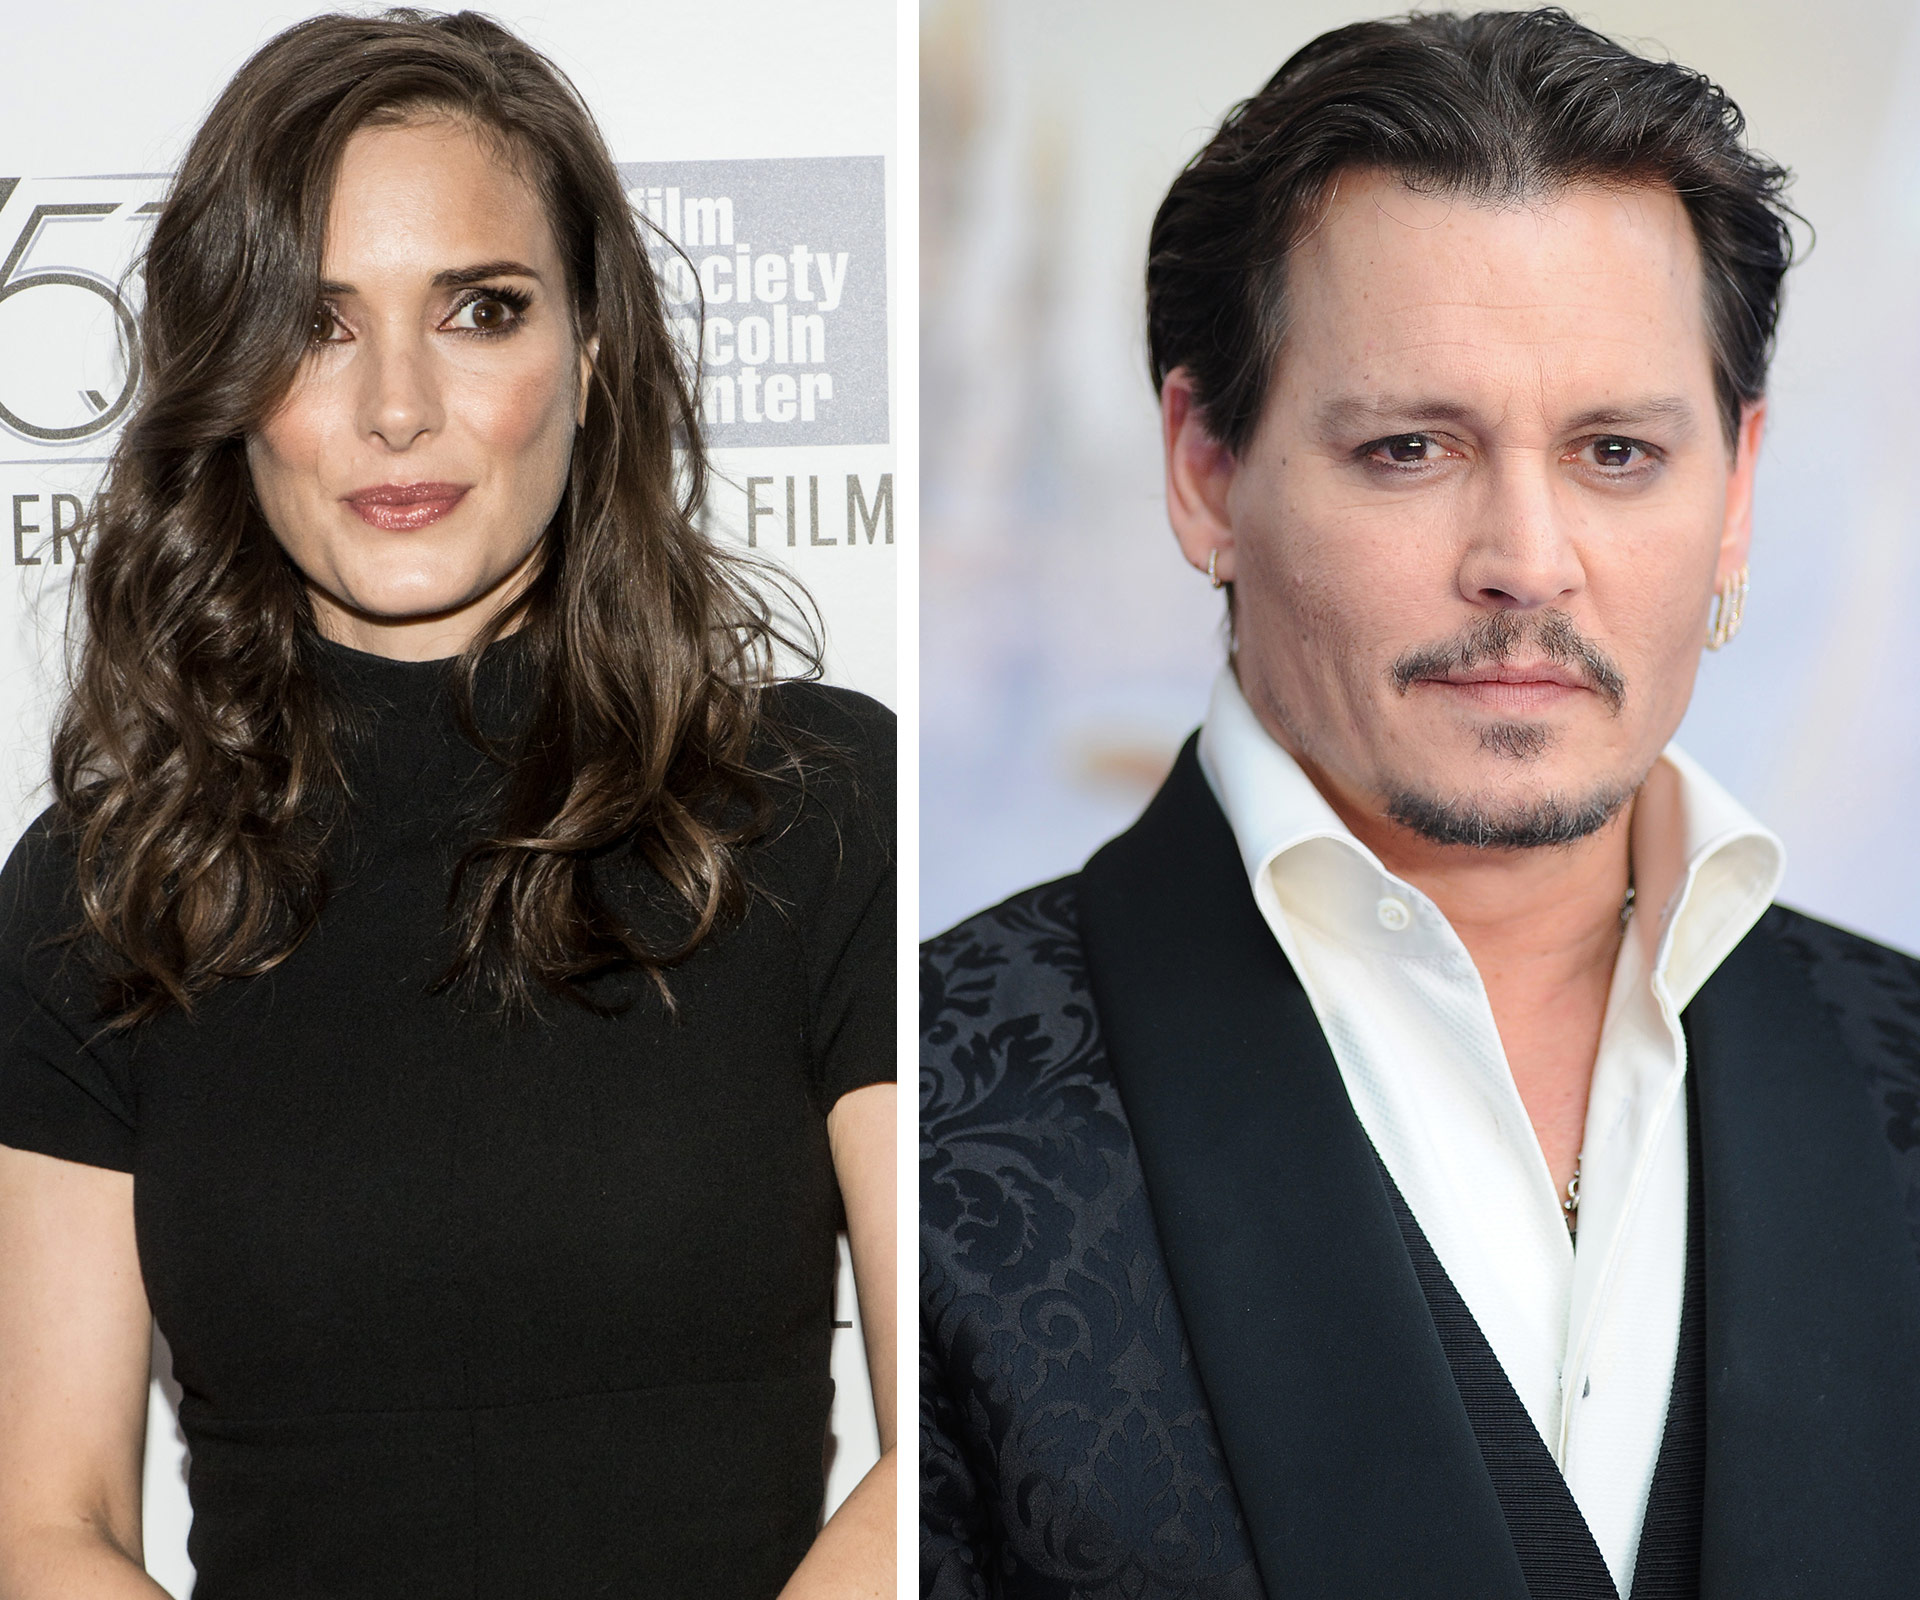 Winona Ryder defends ex Johnny Depp against abuse claims